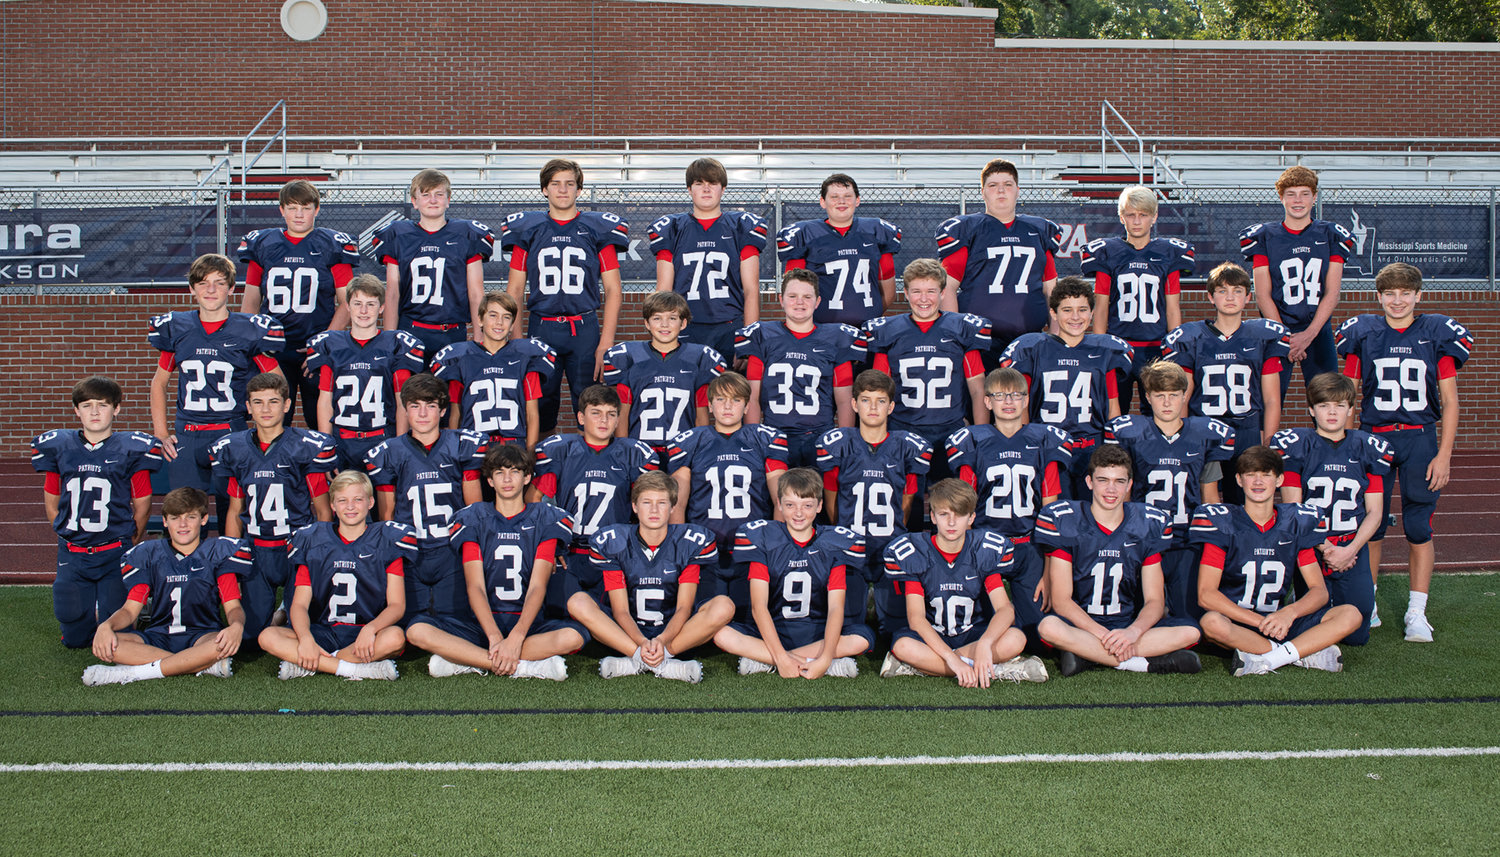 Pictured, left to right, are (Back row)  #60 Hayden Mize, #61 Trace Rowe, #66 Cole Farris, #72 Colt Woods, #74 Jackson Wells, #77 Nick Nelson, #80 Graham Kennedy, #84 Tripp Carroll, (Third row) #23 Mack McIntosh, #24 Reagan Hood, #25 Bayler Foote, #33 Peyton Hester, #52 Bobby Edgar, #54 Frazier James, #58 Judson Hamilton, #59 Smith Street (Second row) #13 Thomas Edwards, #14 Asher Wiggins, #15 Walt Bryson, #16 Holt Adams (Not Pictured), #17 Biven Patterson, #18 Hayden Fiorito, #19 Cash Myrick, #20 Bradyn Mason, #21 Gray Hancock, #22 Walker Rives (Front row) #1 Duren Melton, #2 Ty Childress, #3 Brody Brown, #4 Brody Hillhouse (Not Pictured), #5 Trey Pentecost, #9 Towers Adams, #10 Hayes Harless, #11 Boston Sims, and #12 Pierce Ingram.